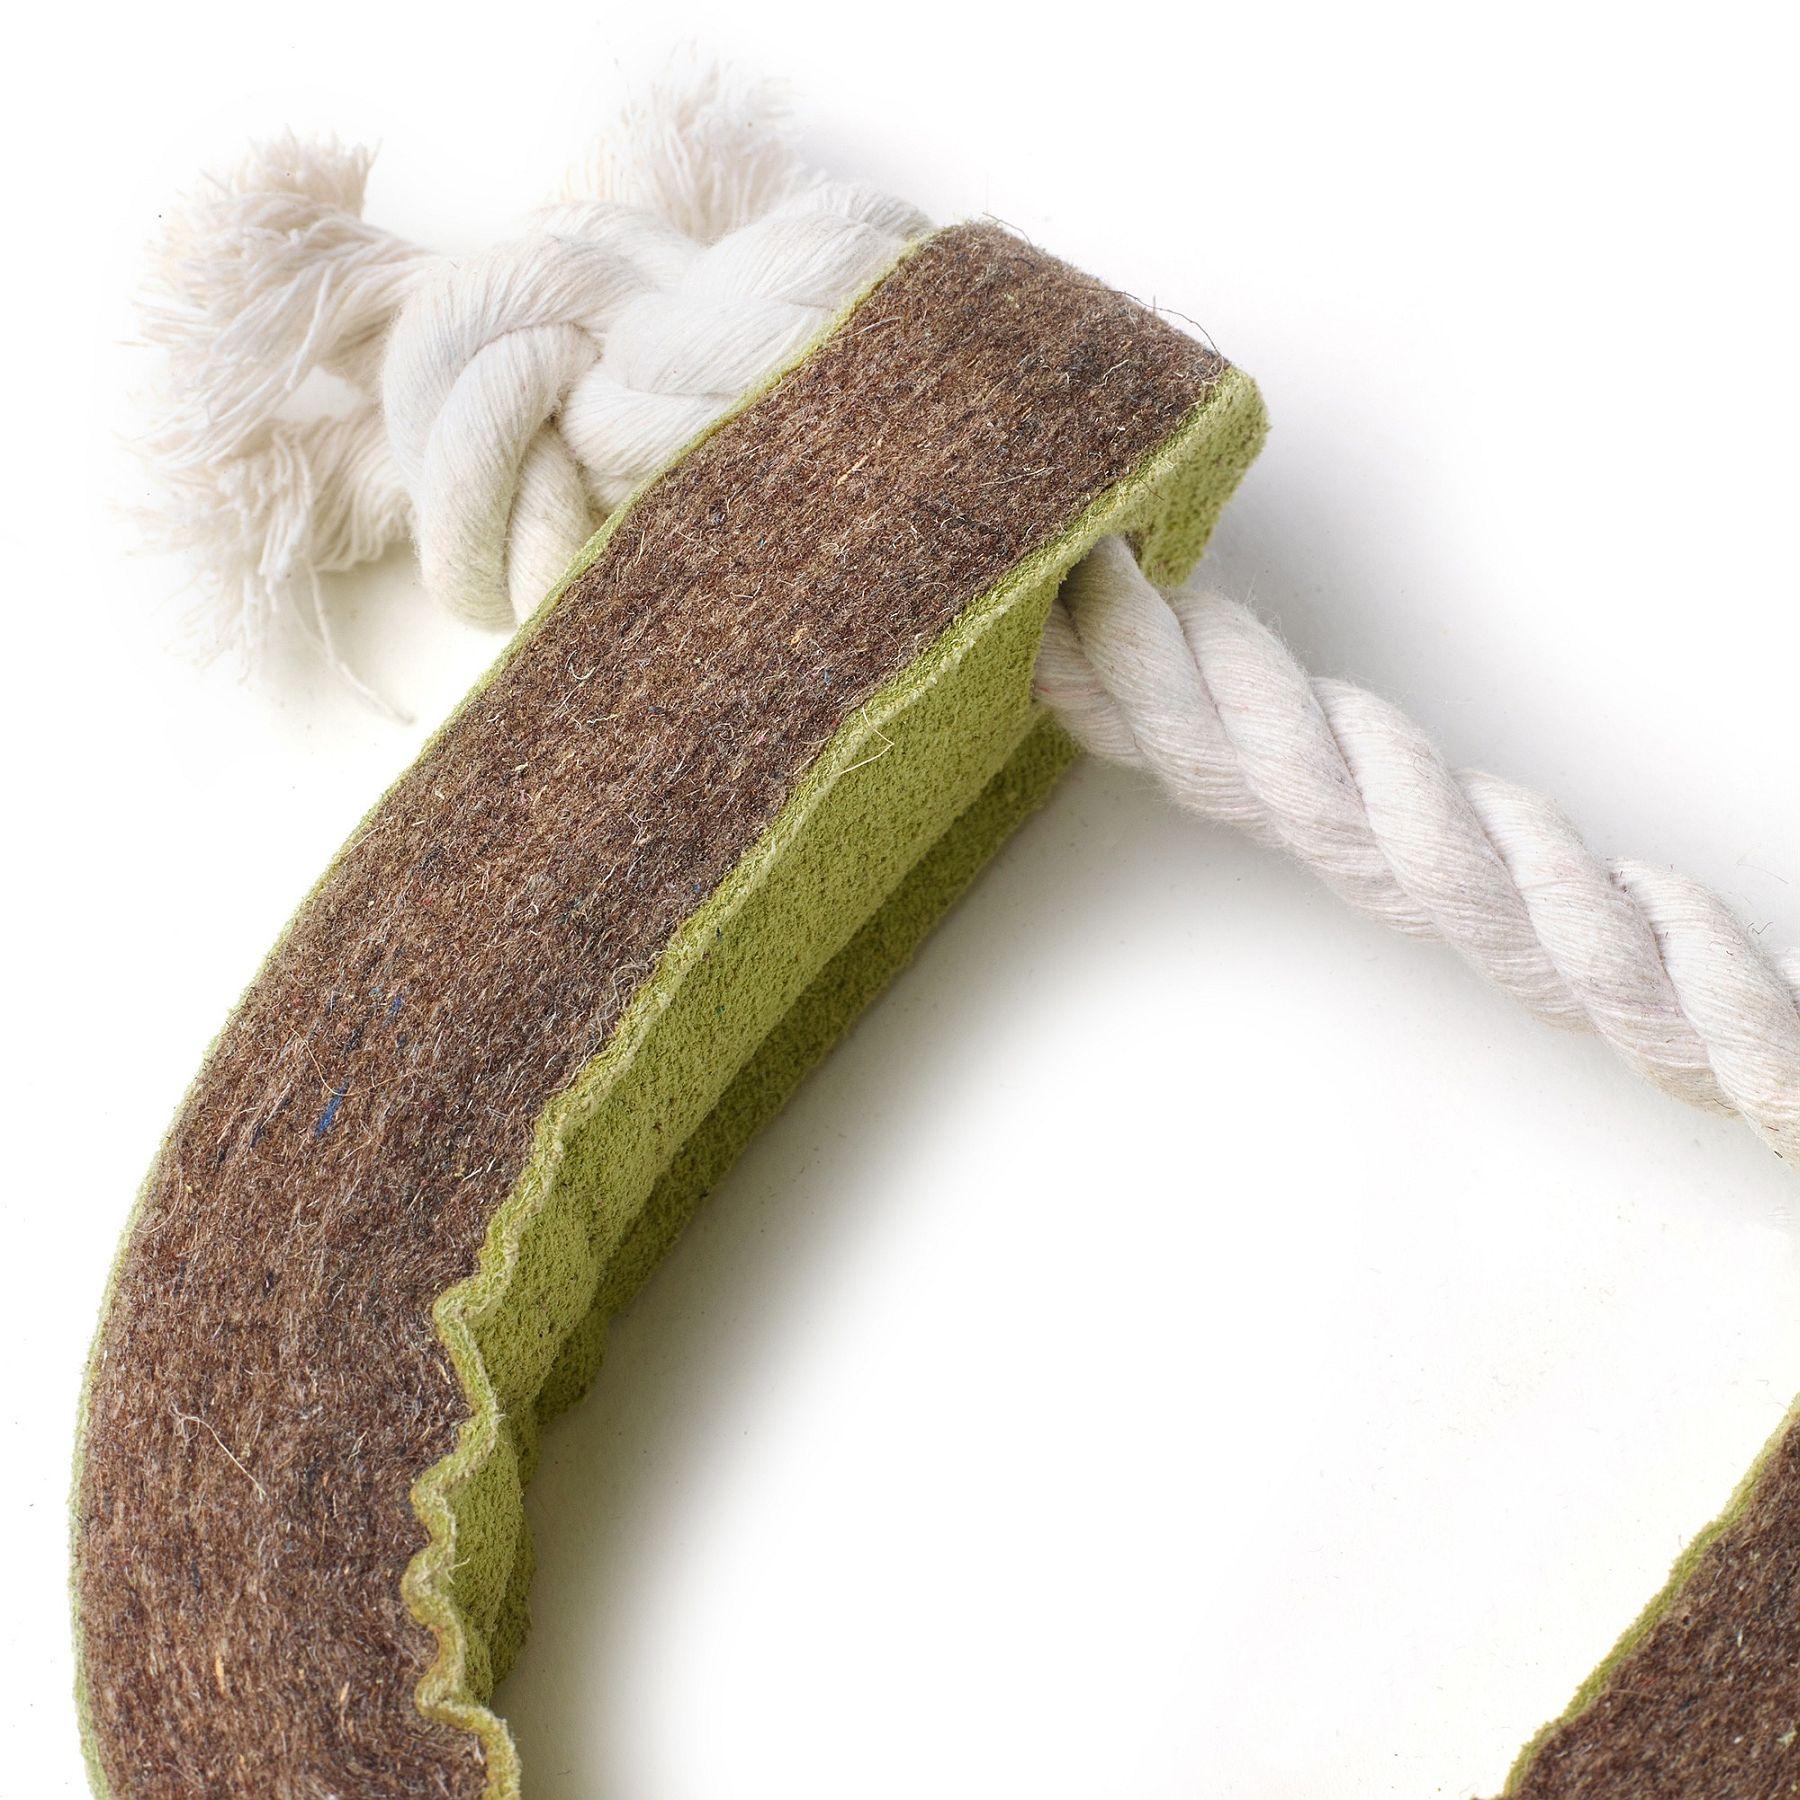 703625146114 Green and Wild's Push Me Pull Me eco friendly jute dog toy.